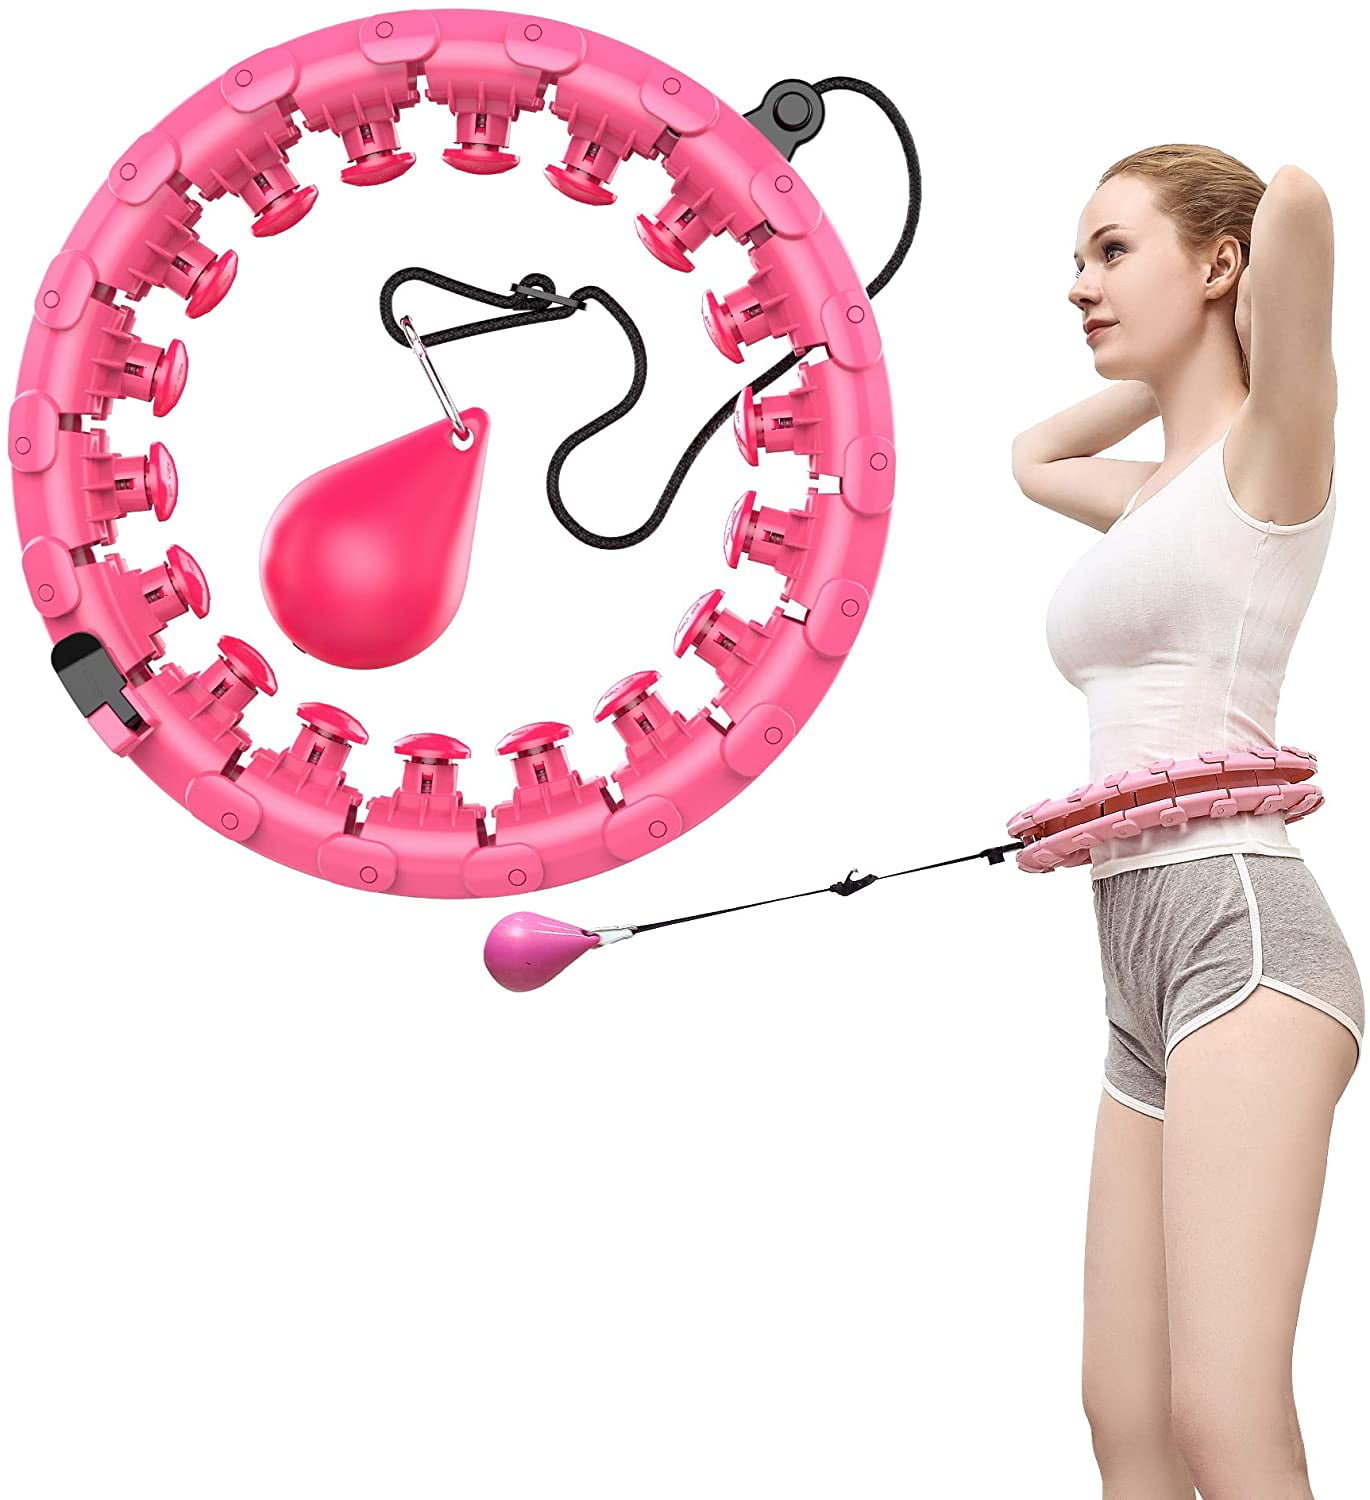 16 Knots Detachable SIGOODS Hoola Hoop for Adults Weighted for Exercise Adjustable Sections Professional Hoola Hoop for Beauty and Massage